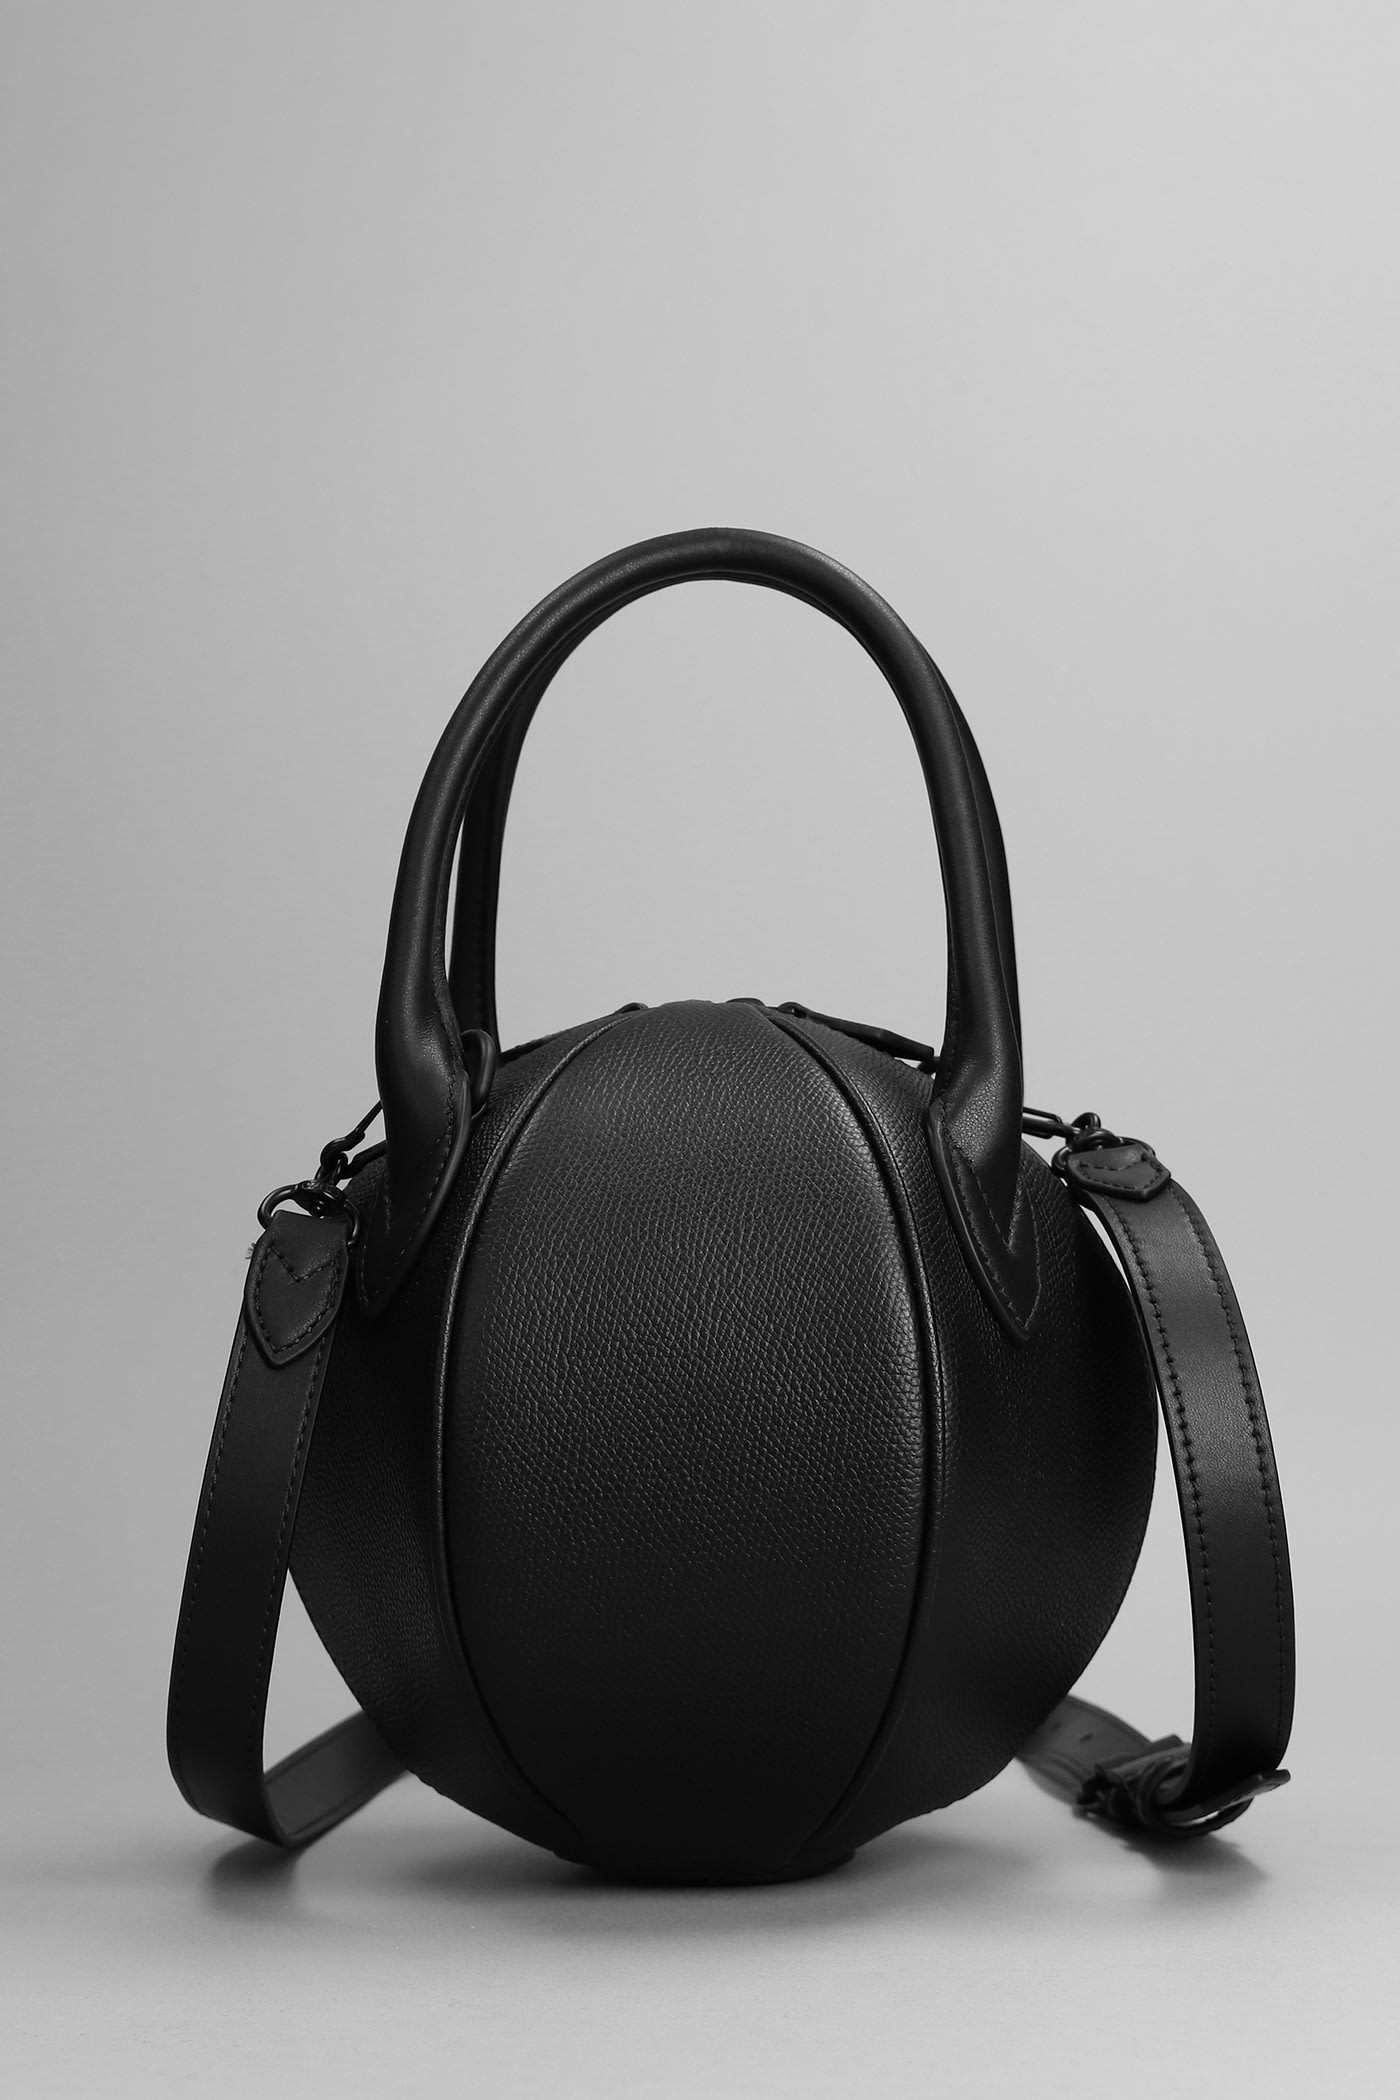 Kenzo Hand Bag In Black Leather